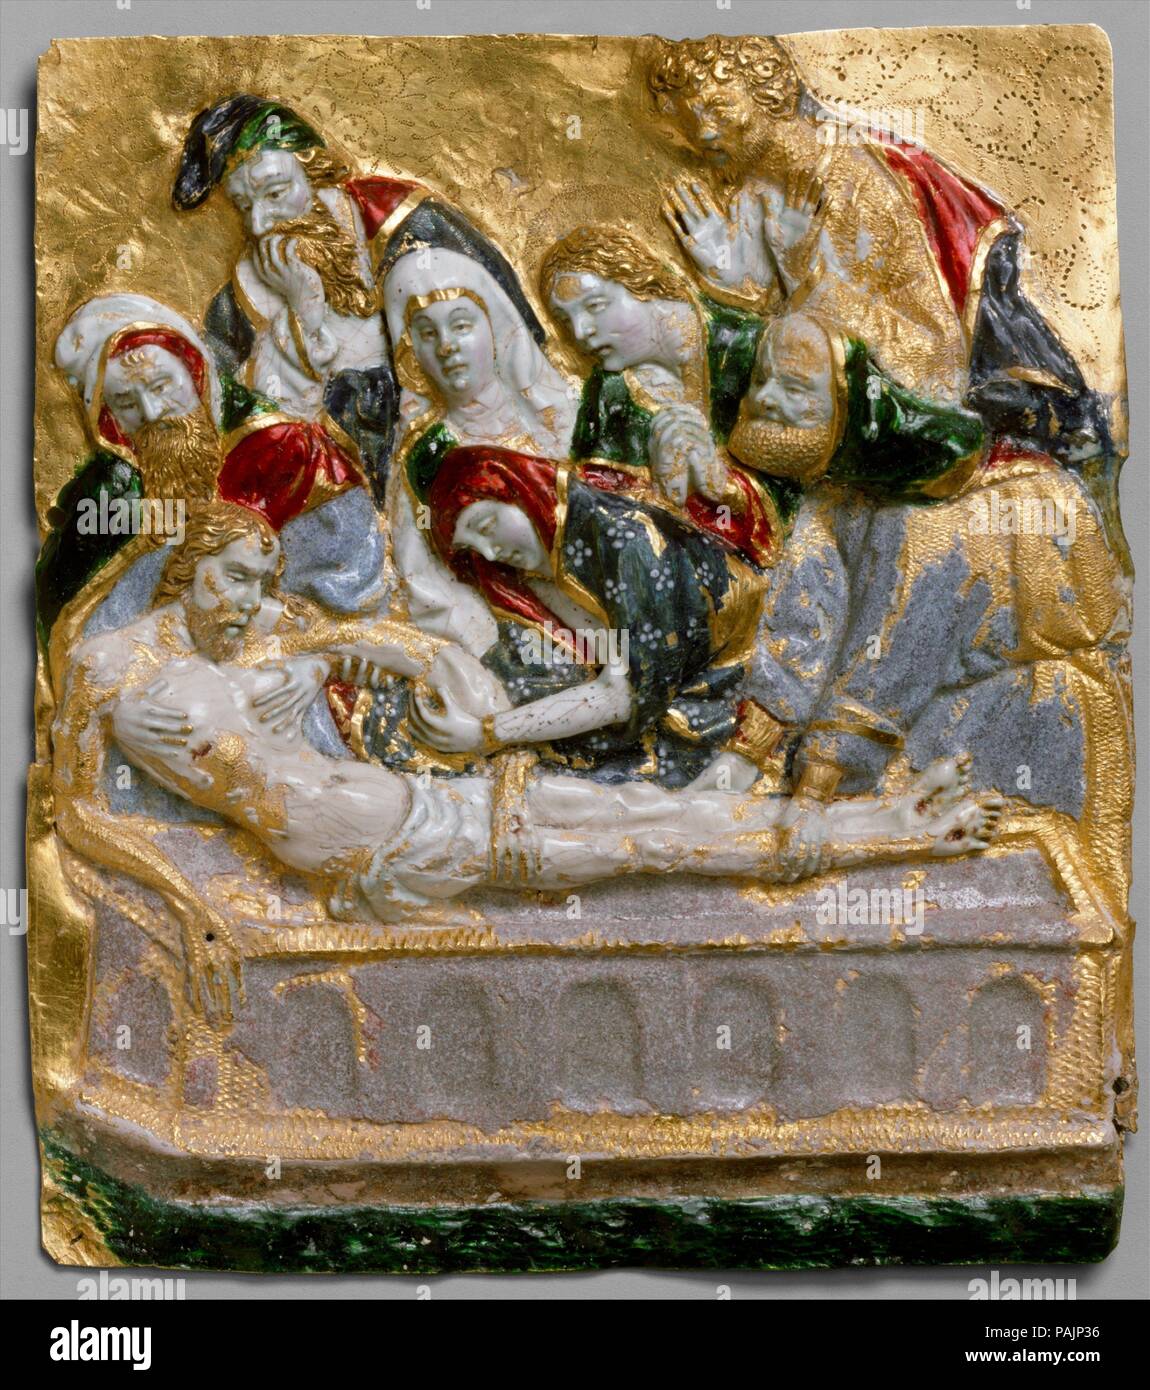 The Entombment of Christ. Culture: French. Dimensions: Overall: 3 7/16 x 3 1/16 x 3/16 in. (8.7 x 7.7 x 0.5 cm). Date: ca. 1390-1405.  The entombment of Christ after the Crucifixion is variously described in the Four Gospels. Each of the accounts notes the presence of a wealthy man at the scene, Joseph of Arimathea; with him, according to Matthew and Mark, were Mary Magdalene and Mary, the mother of James. However, only the Gospel of Saint John refers to Nicodemus, a Pharisee, as being in attendance. None of the Gospels describes the crowd of mourners gathered at the bier, as seen here, but th Stock Photo